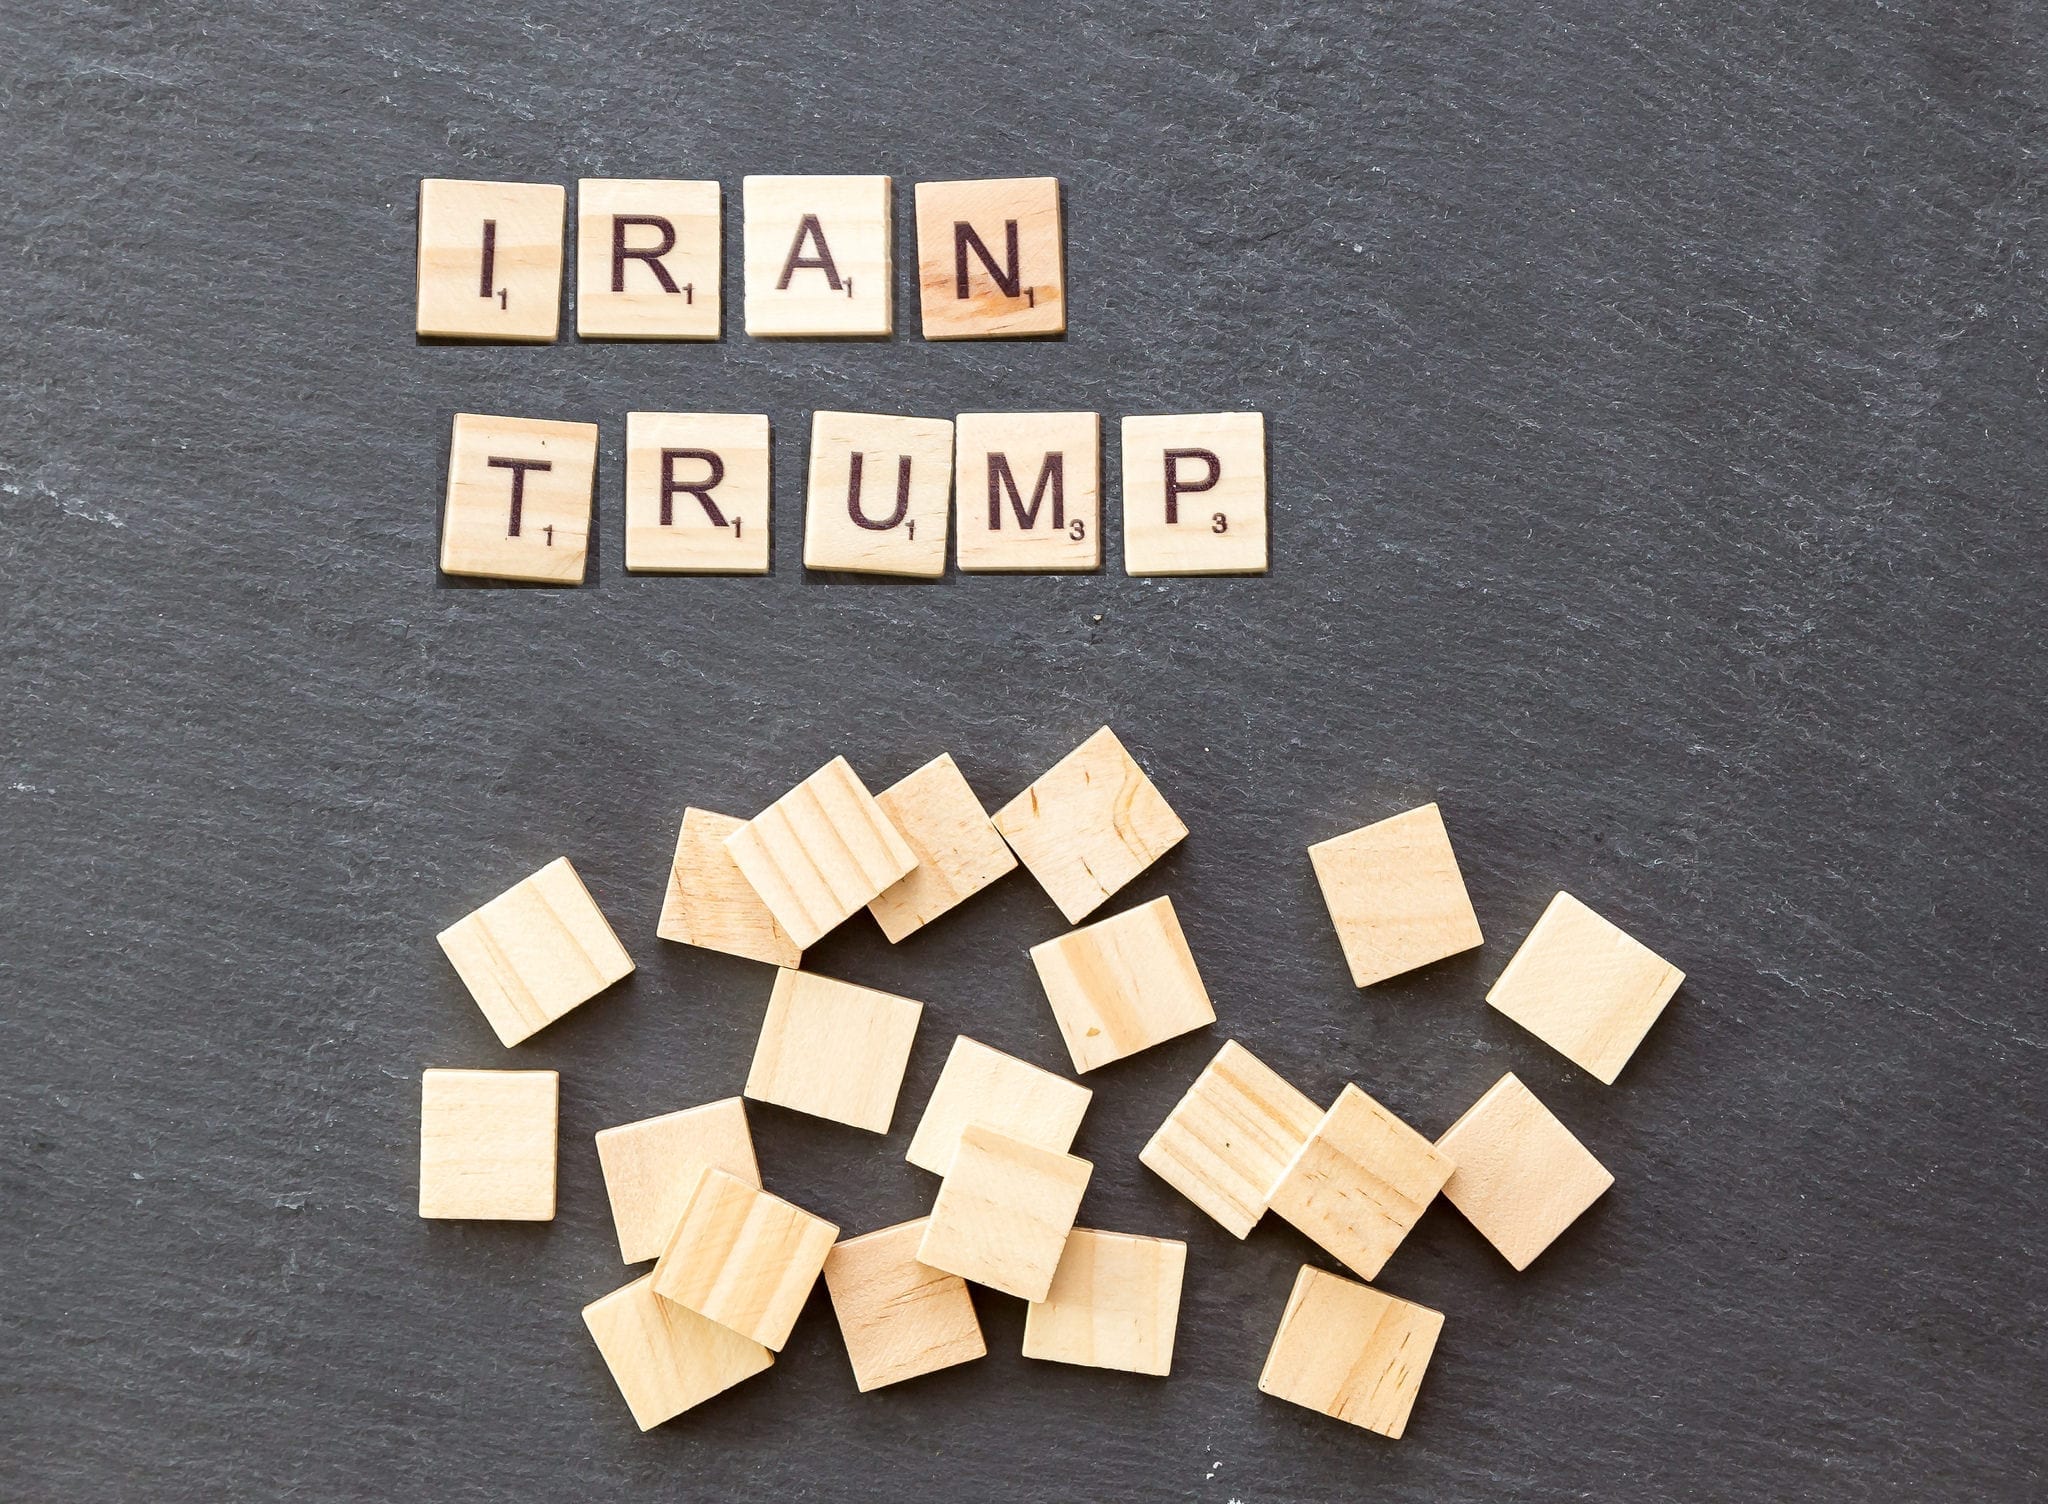 President Trump Stays Mum on Iran Nuclear Deal Decision; image by Marco Verch, via Flickr, CC BY 2.0, no changes made.